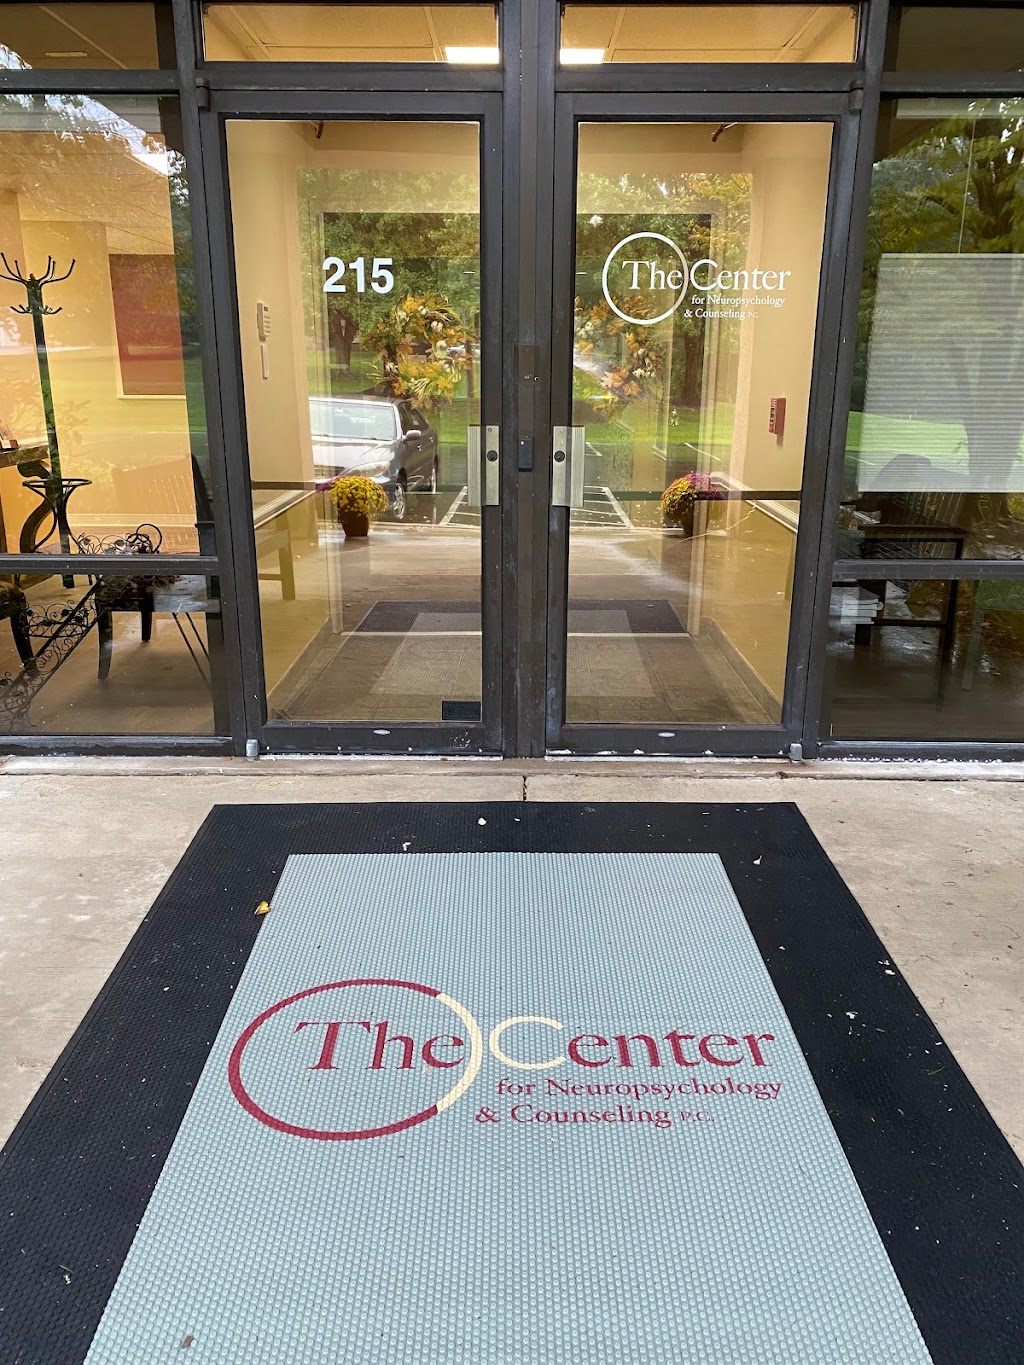 The Center for Neuropsychology and Counseling | 200 Highpoint Dr # 215, Chalfont, PA 18914 | Phone: (215) 491-1119